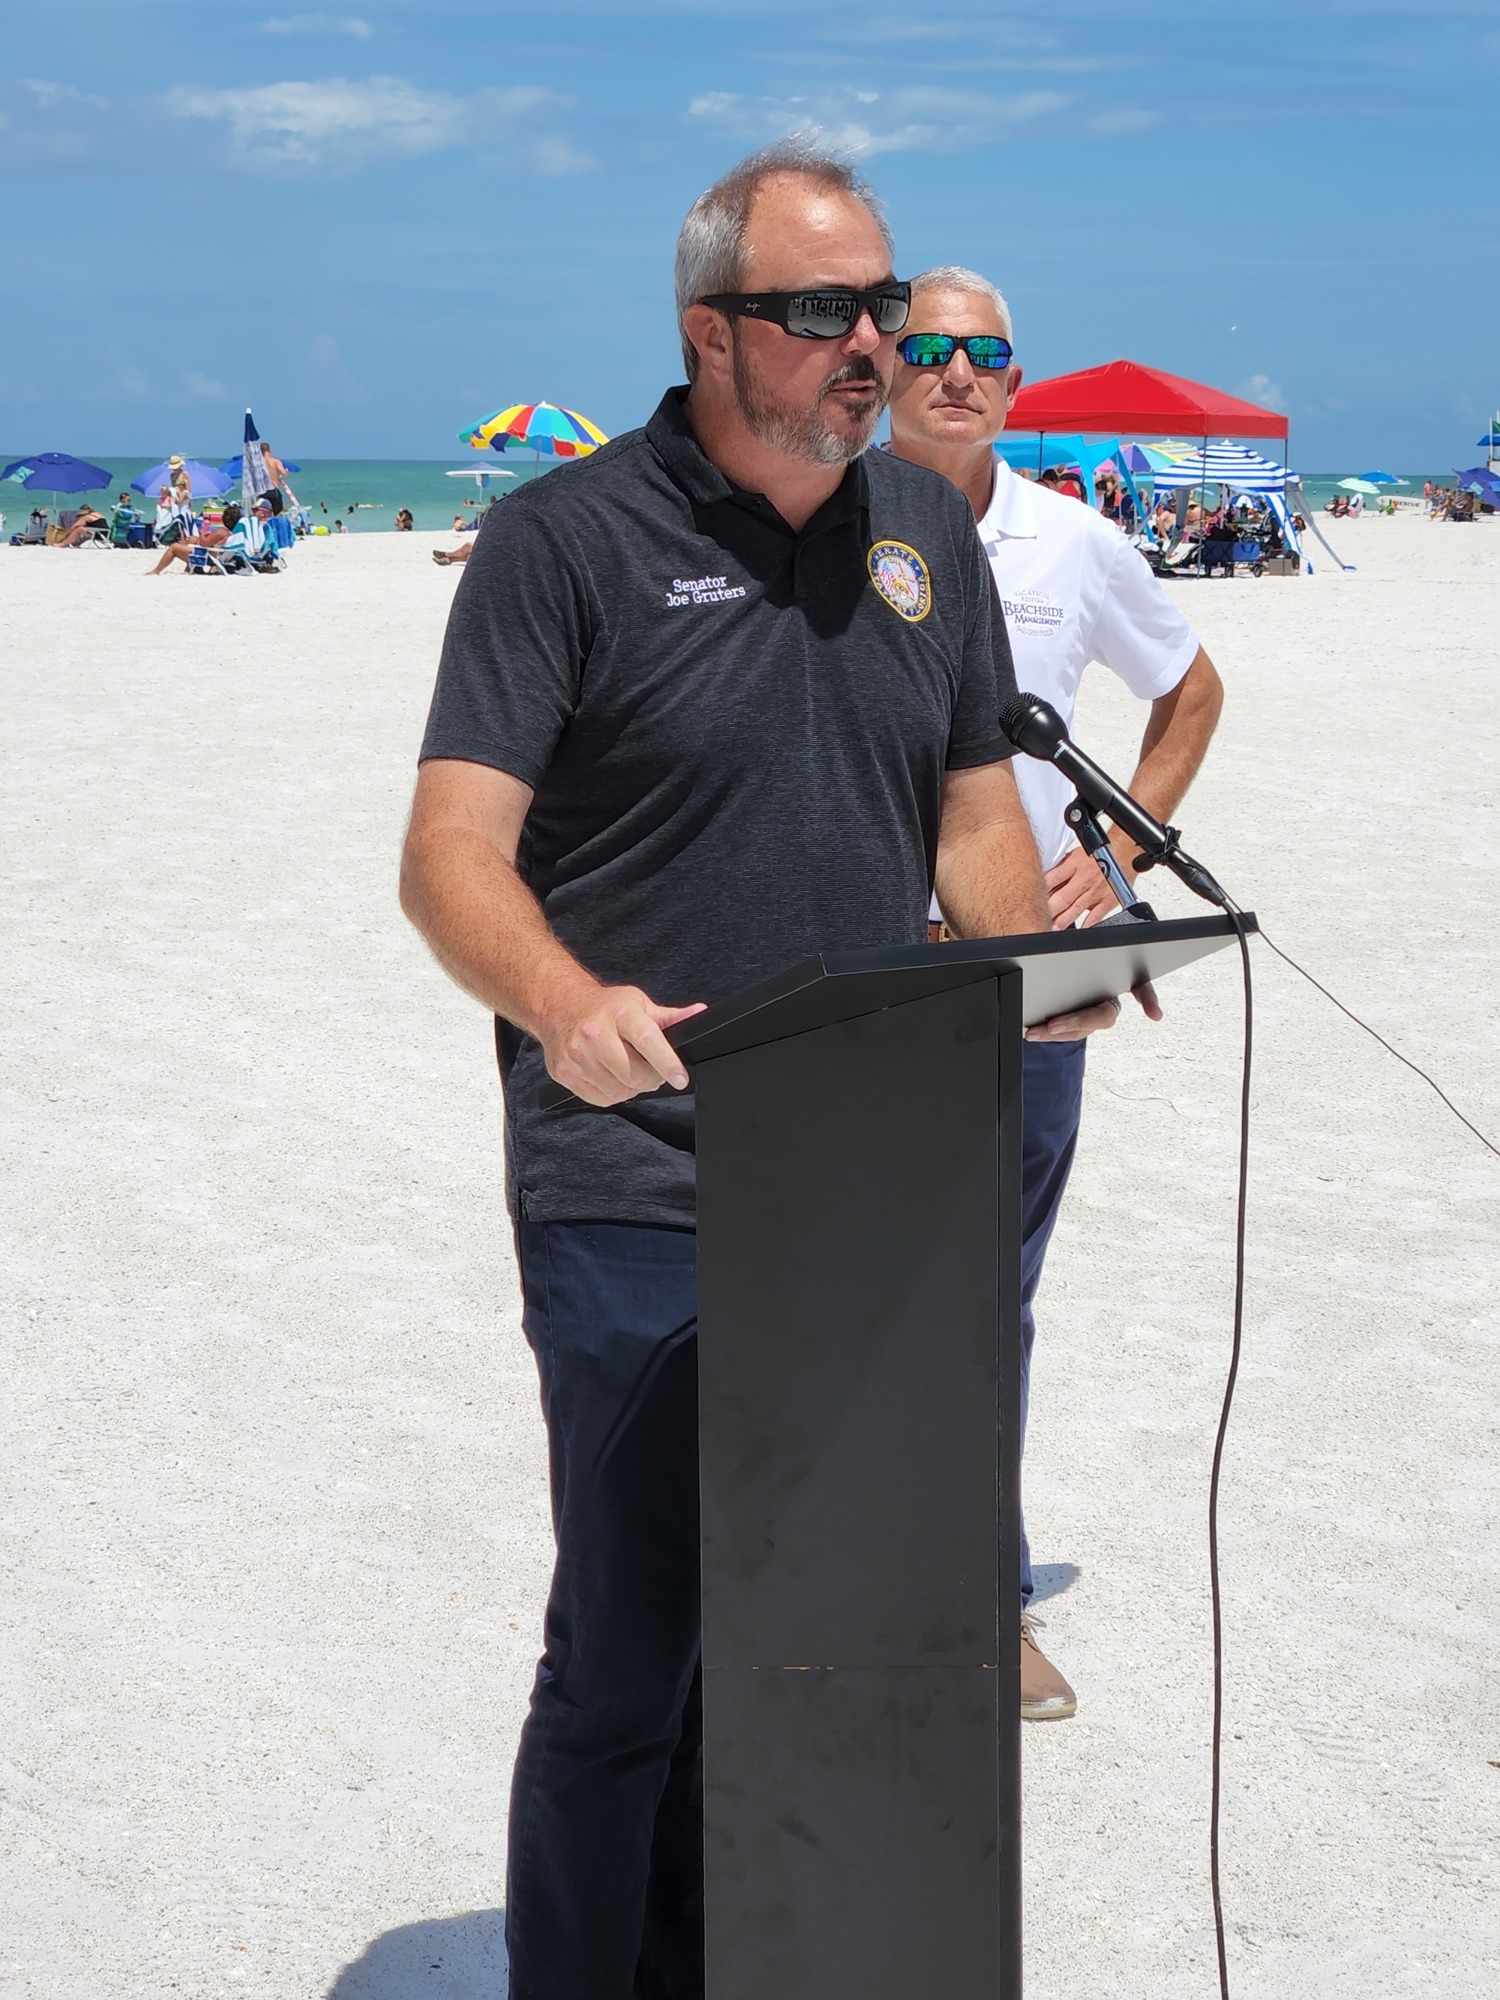 State Sen. Joe Gruters of Sarasota sponsored the bill signed into law last week that allows local governments to ban smoking on beaches. (Andrew Warfield)